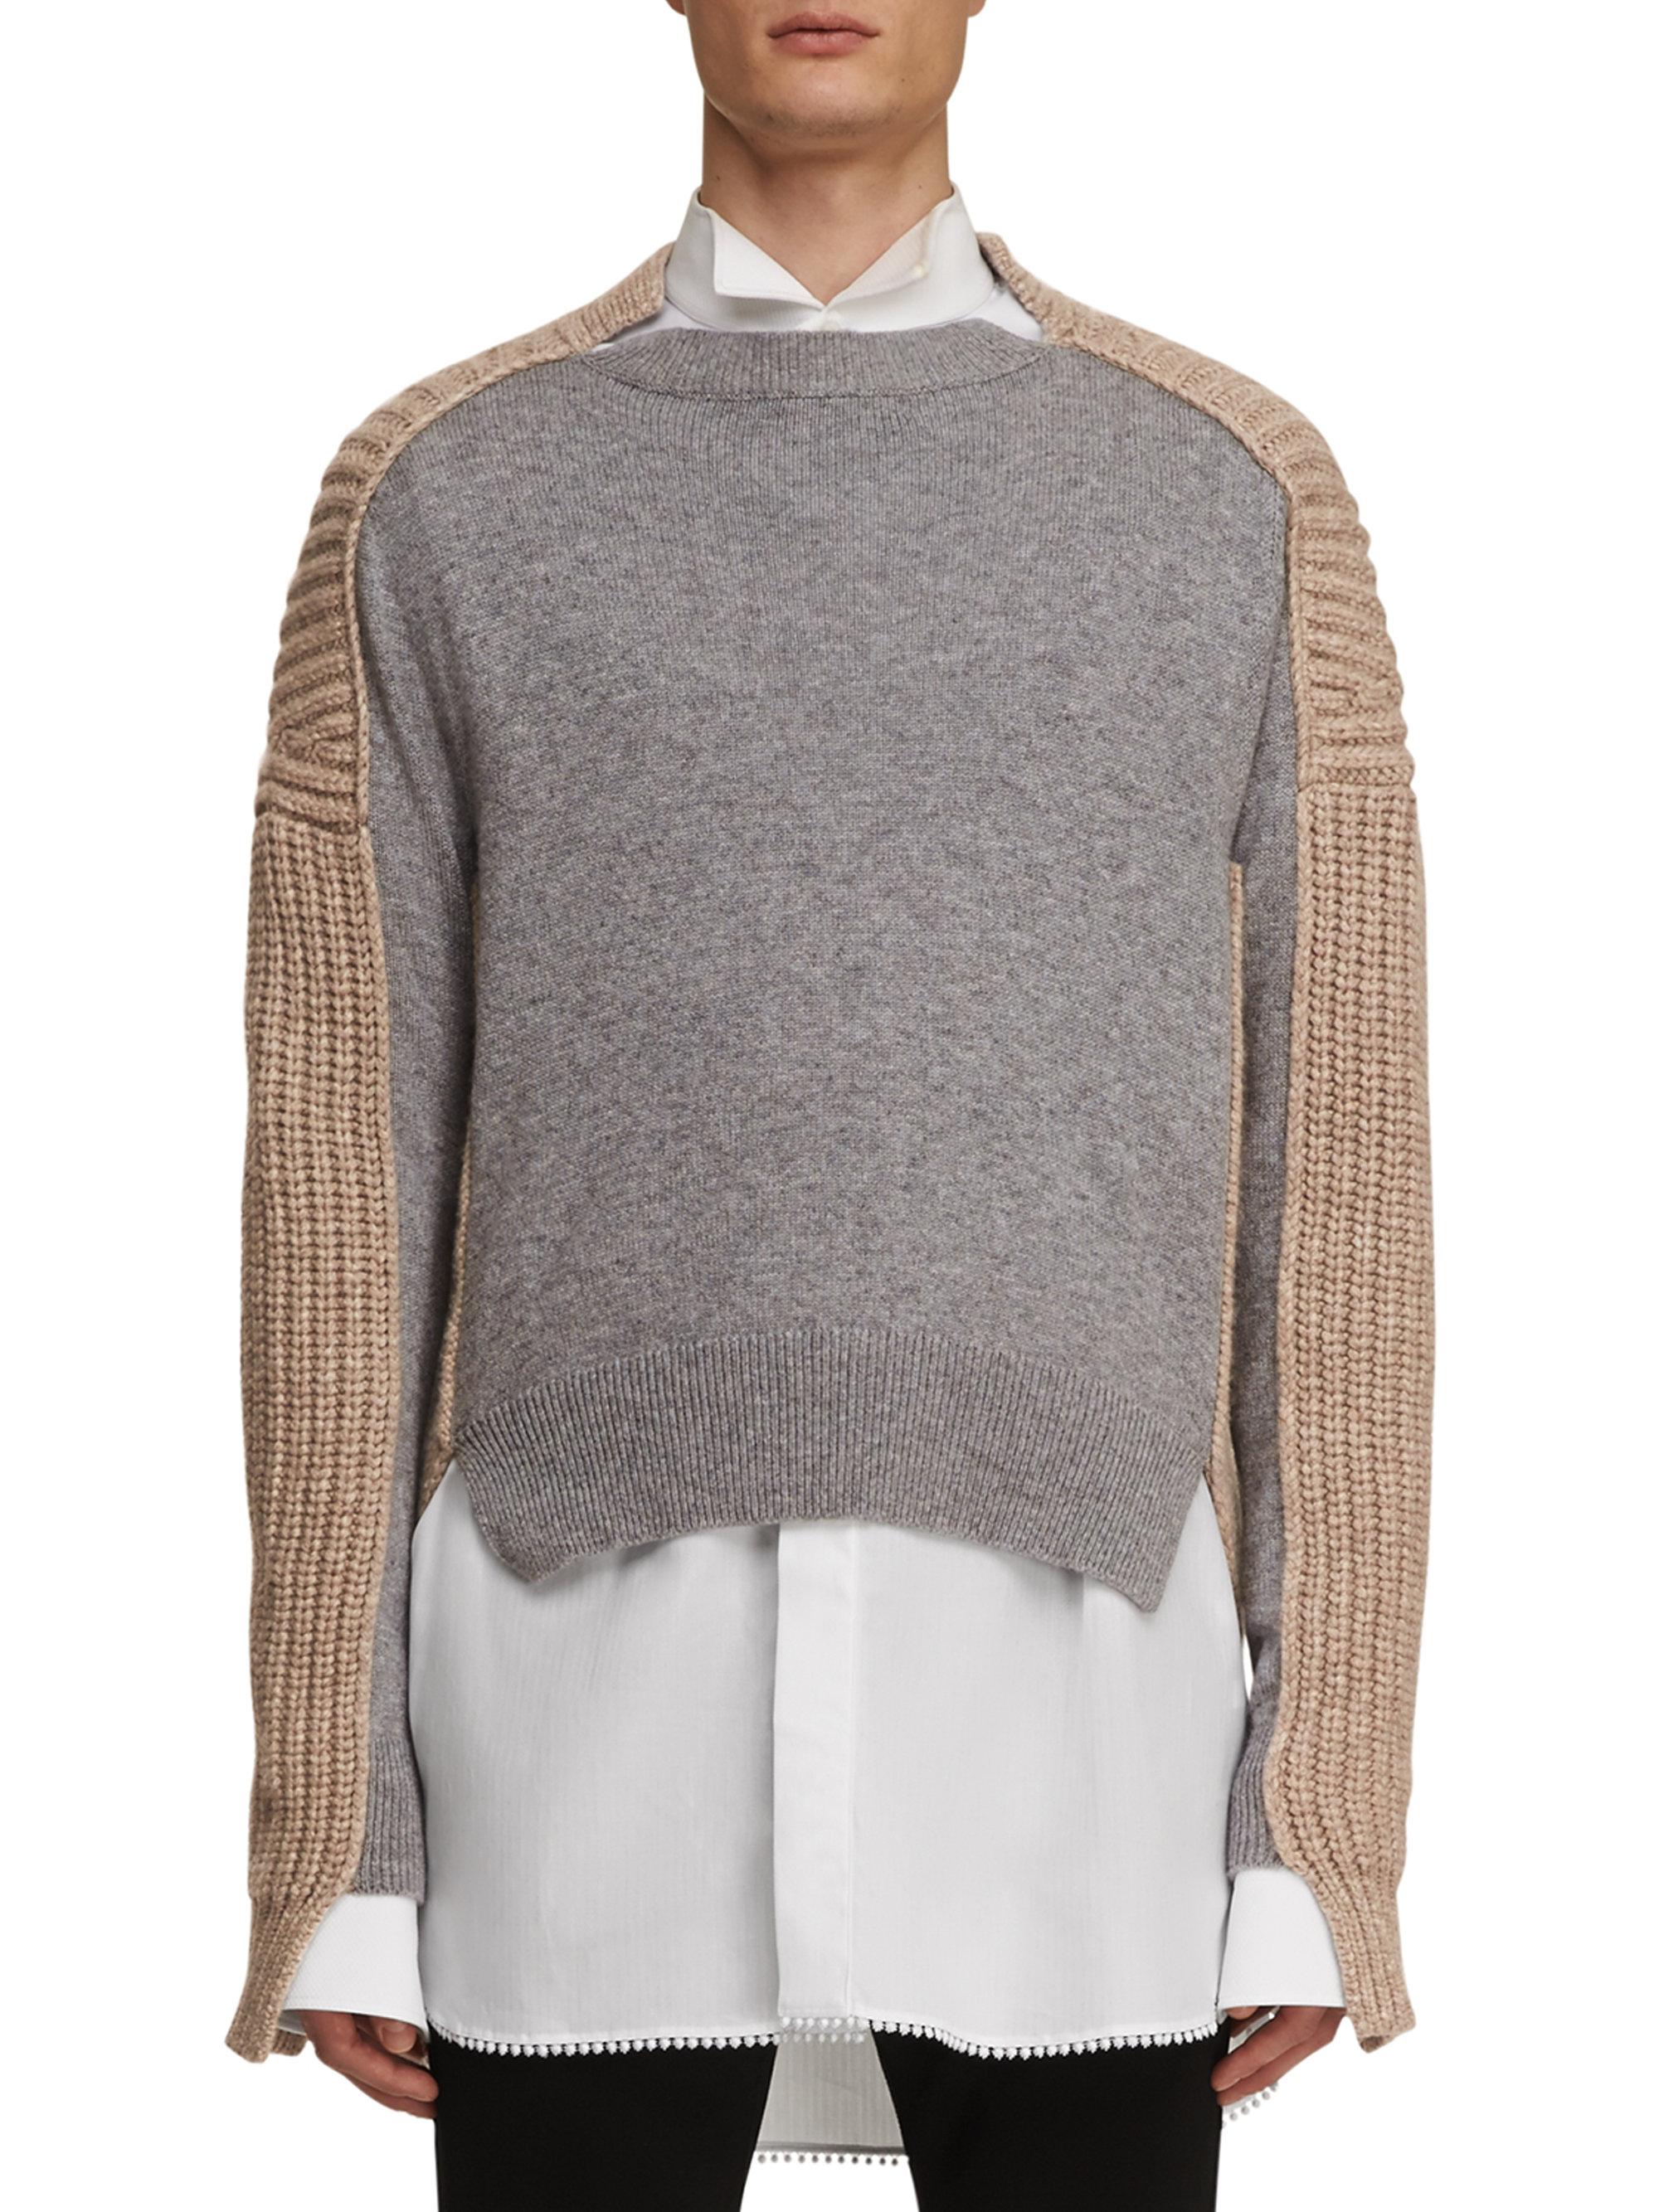 Lyst - Burberry Paneled Cashmere Fisherman Sweater in Gray for Men